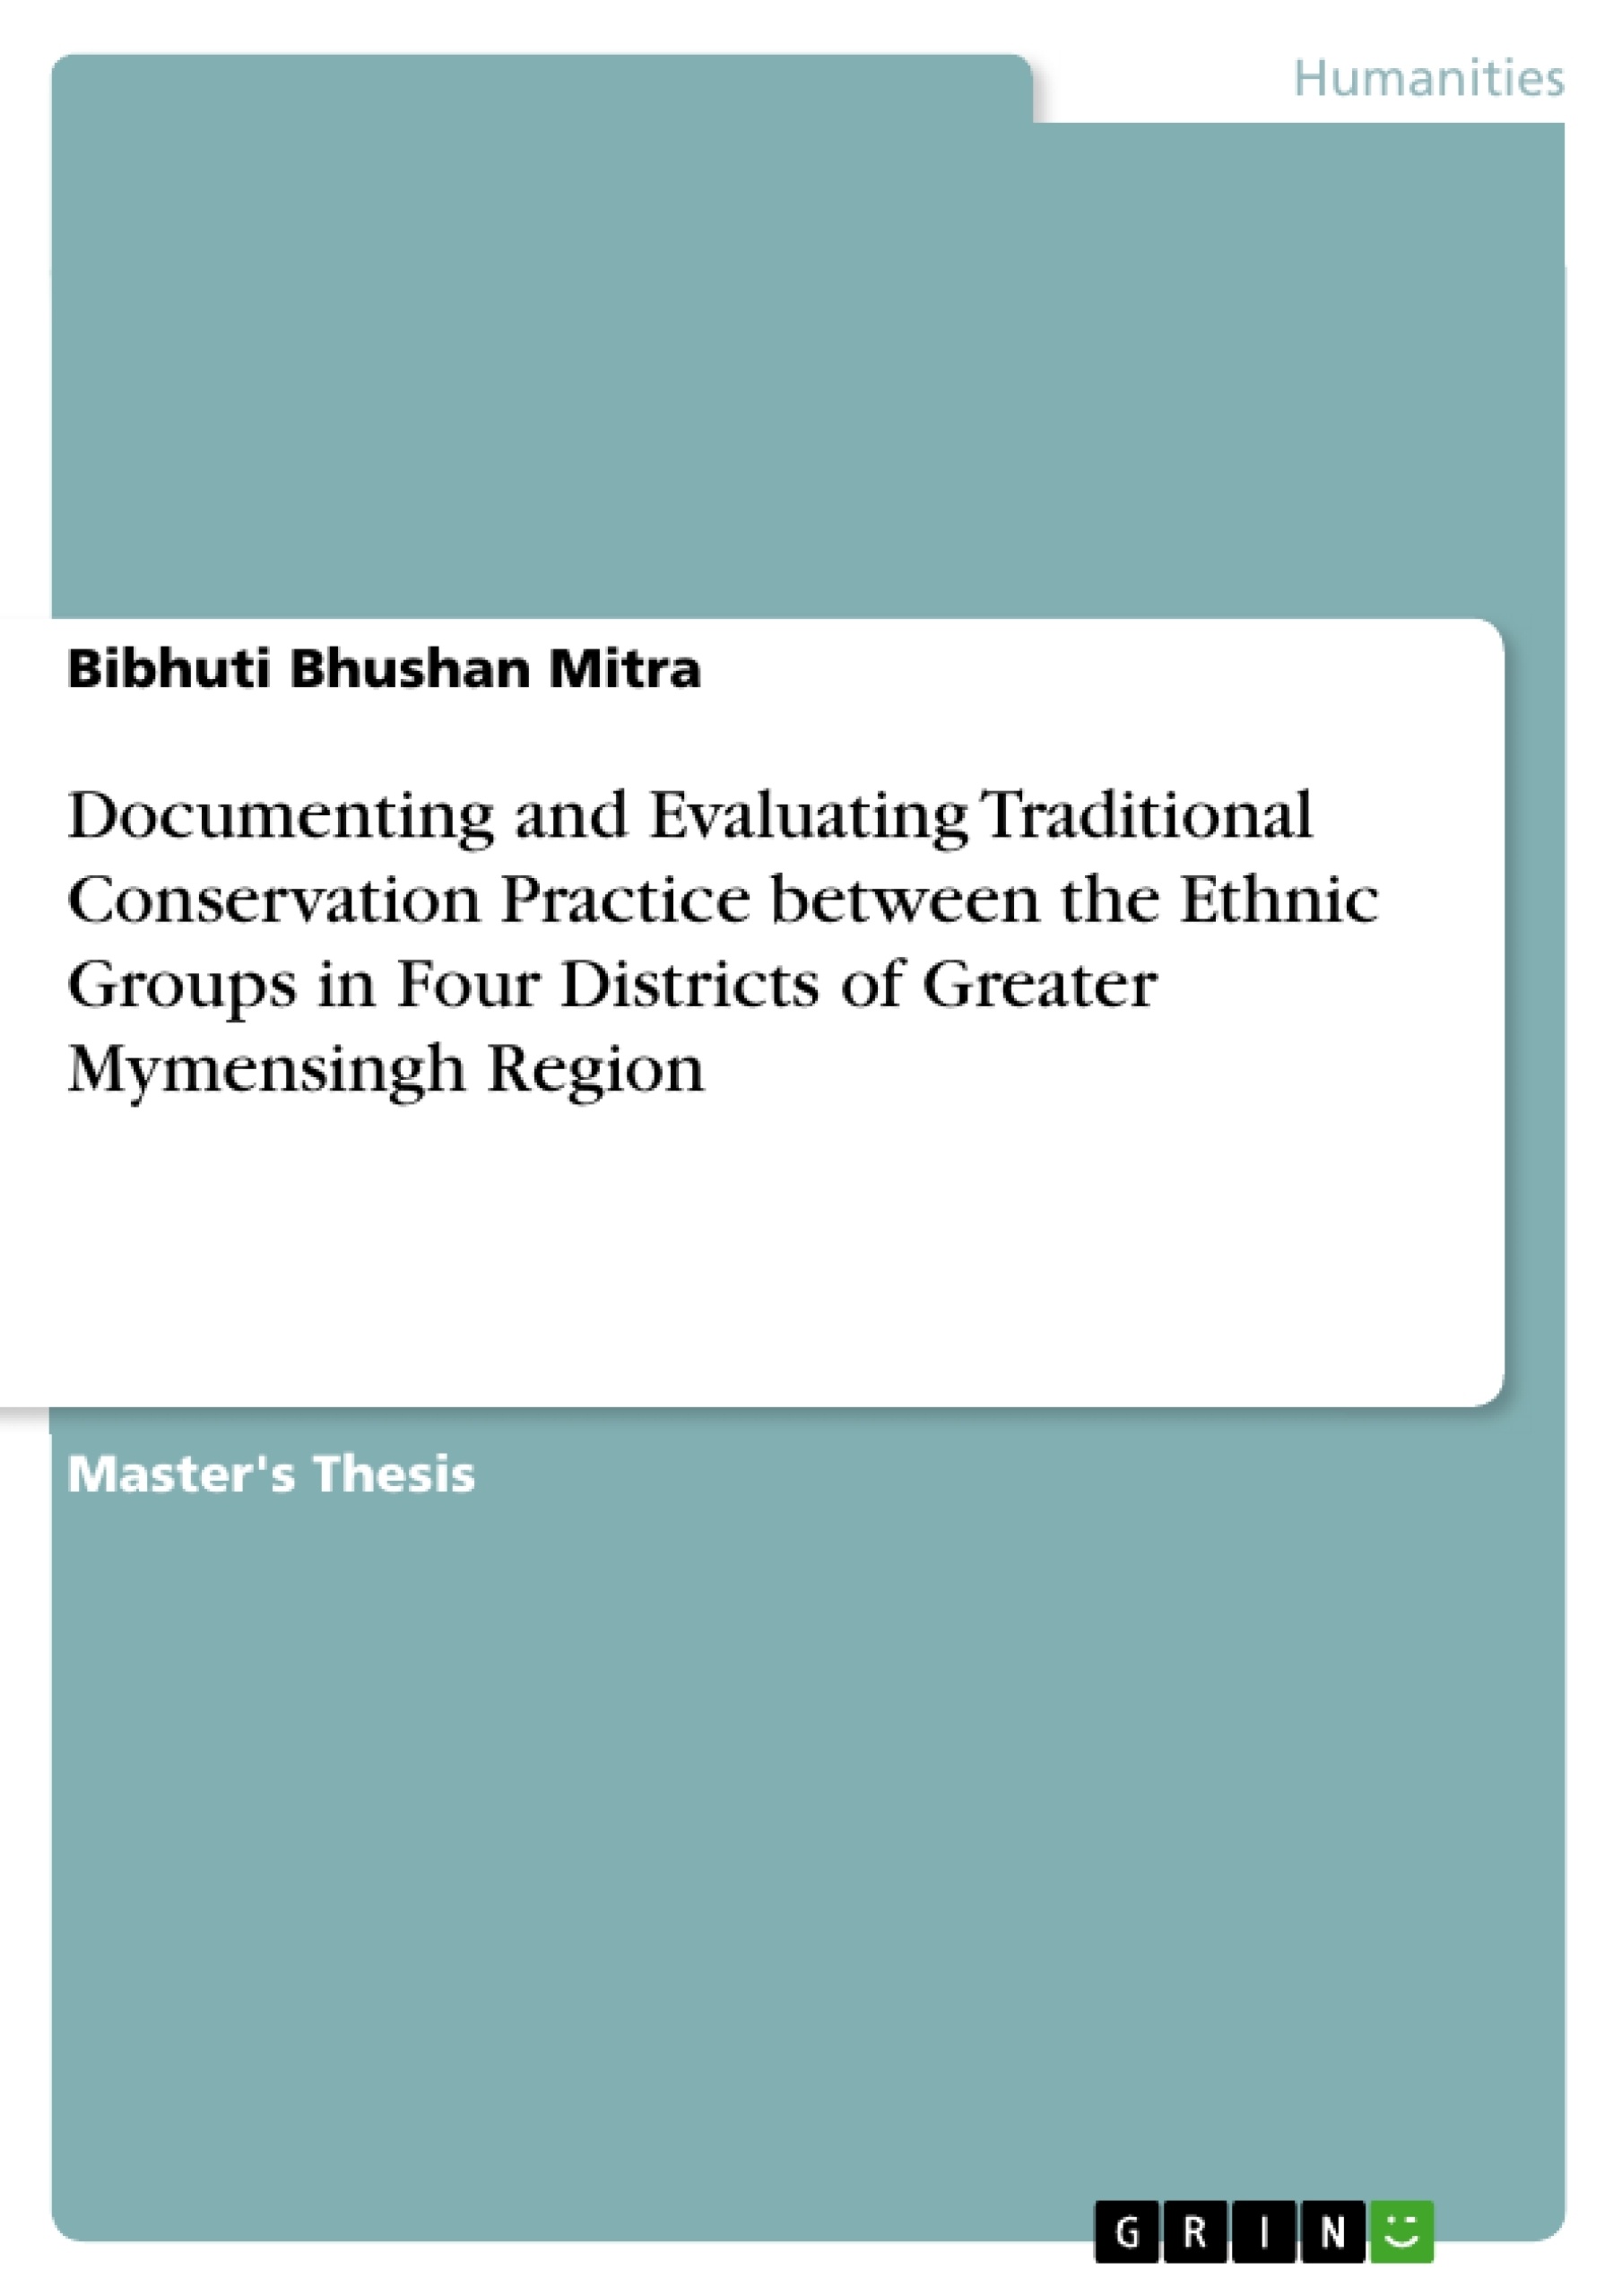 Título: Documenting and Evaluating Traditional Conservation Practice between the Ethnic Groups in Four Districts of Greater Mymensingh Region